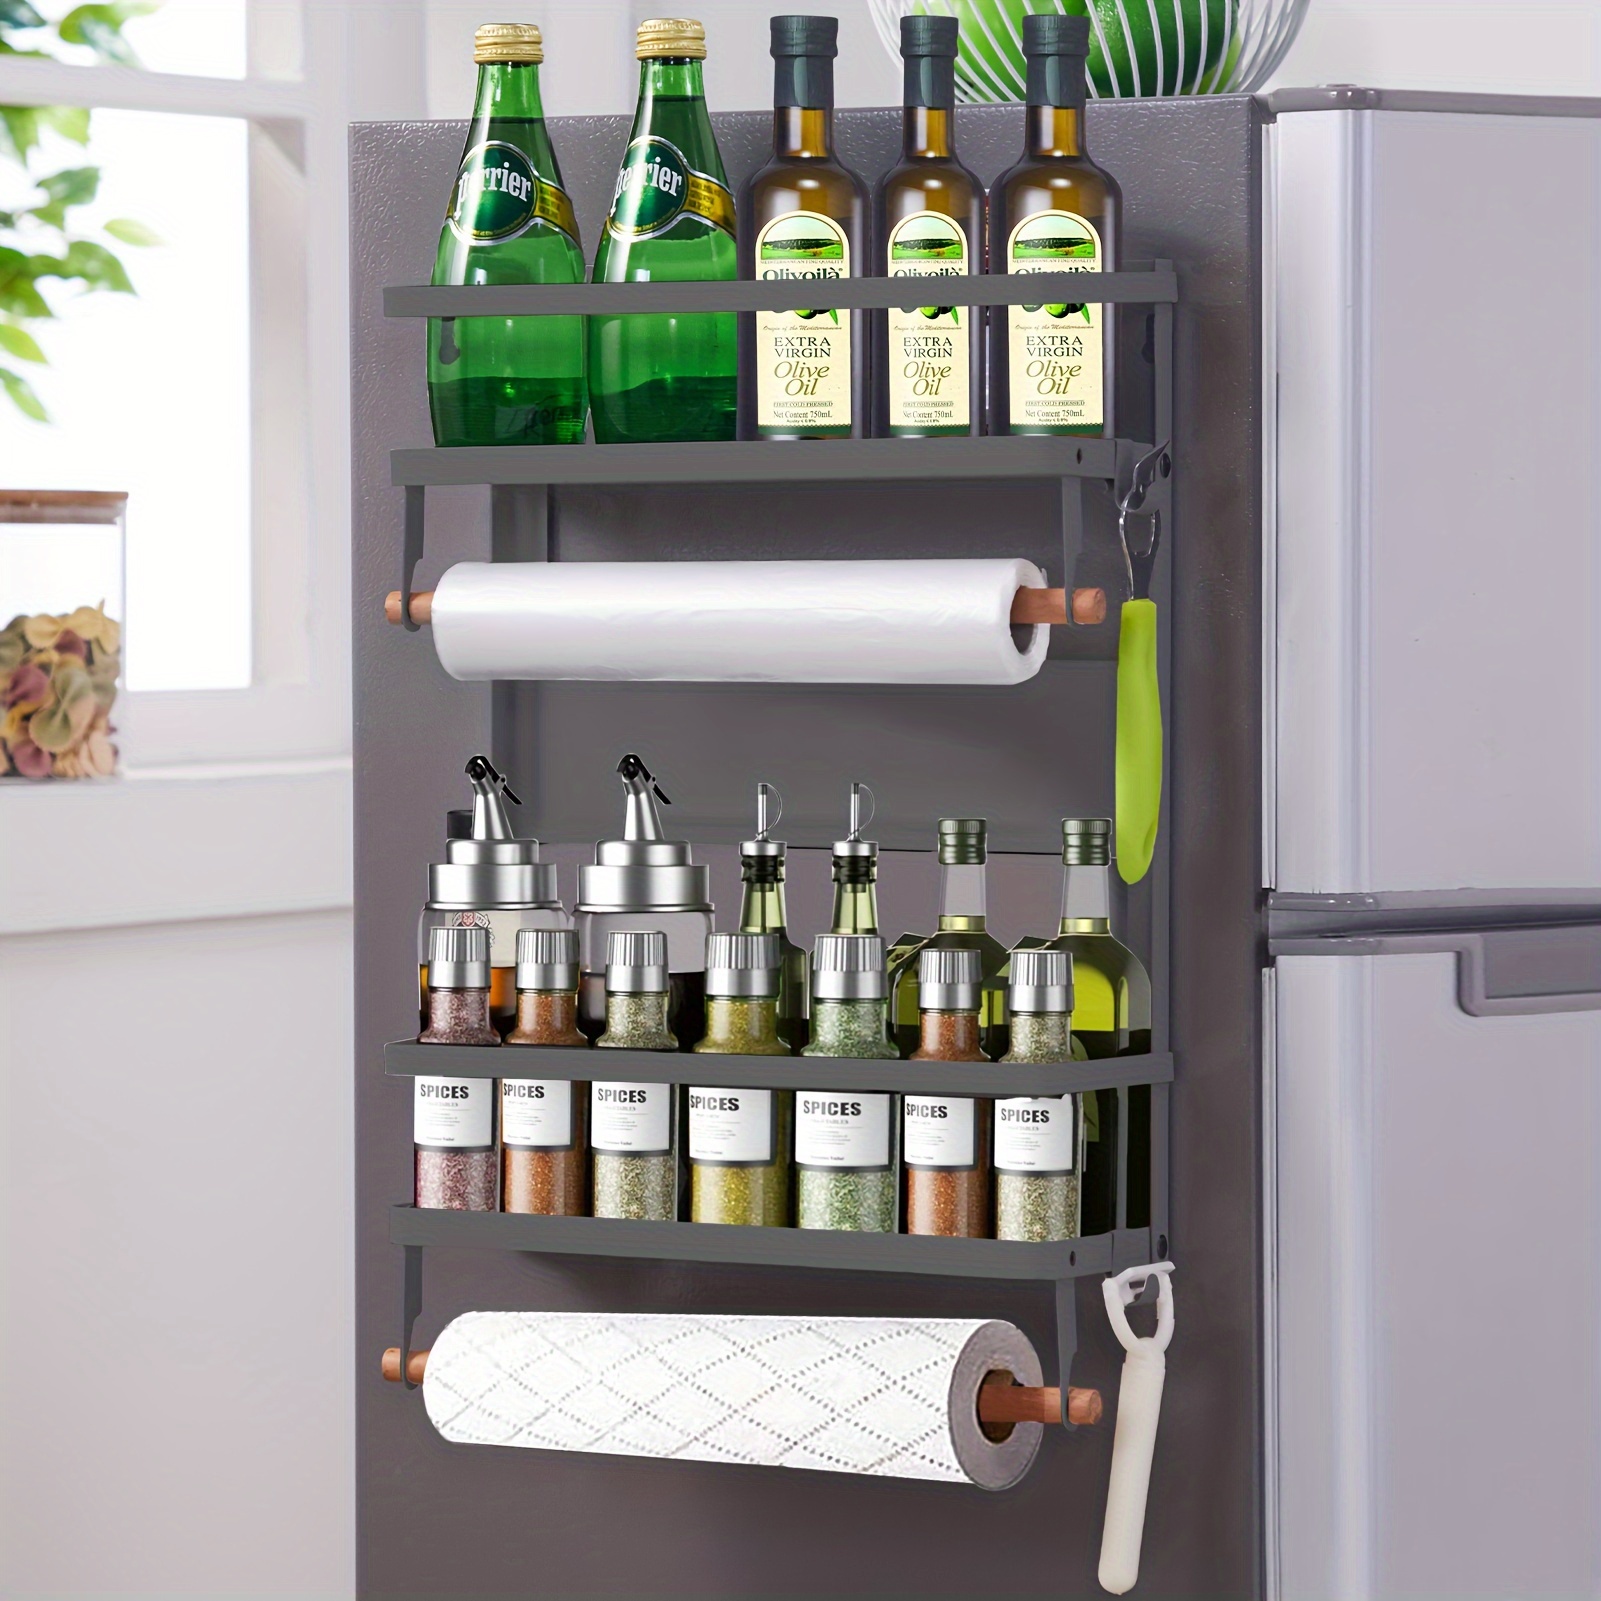 

Magnetic Fridge Organizer Spice Rack With Paper Towel Holder And 5 Extra Hooks | 4 Tier Magnet Refrigerator Shelf In Kitchen Holds Up To 45 Lbs | 16x12x4 Inch Grey